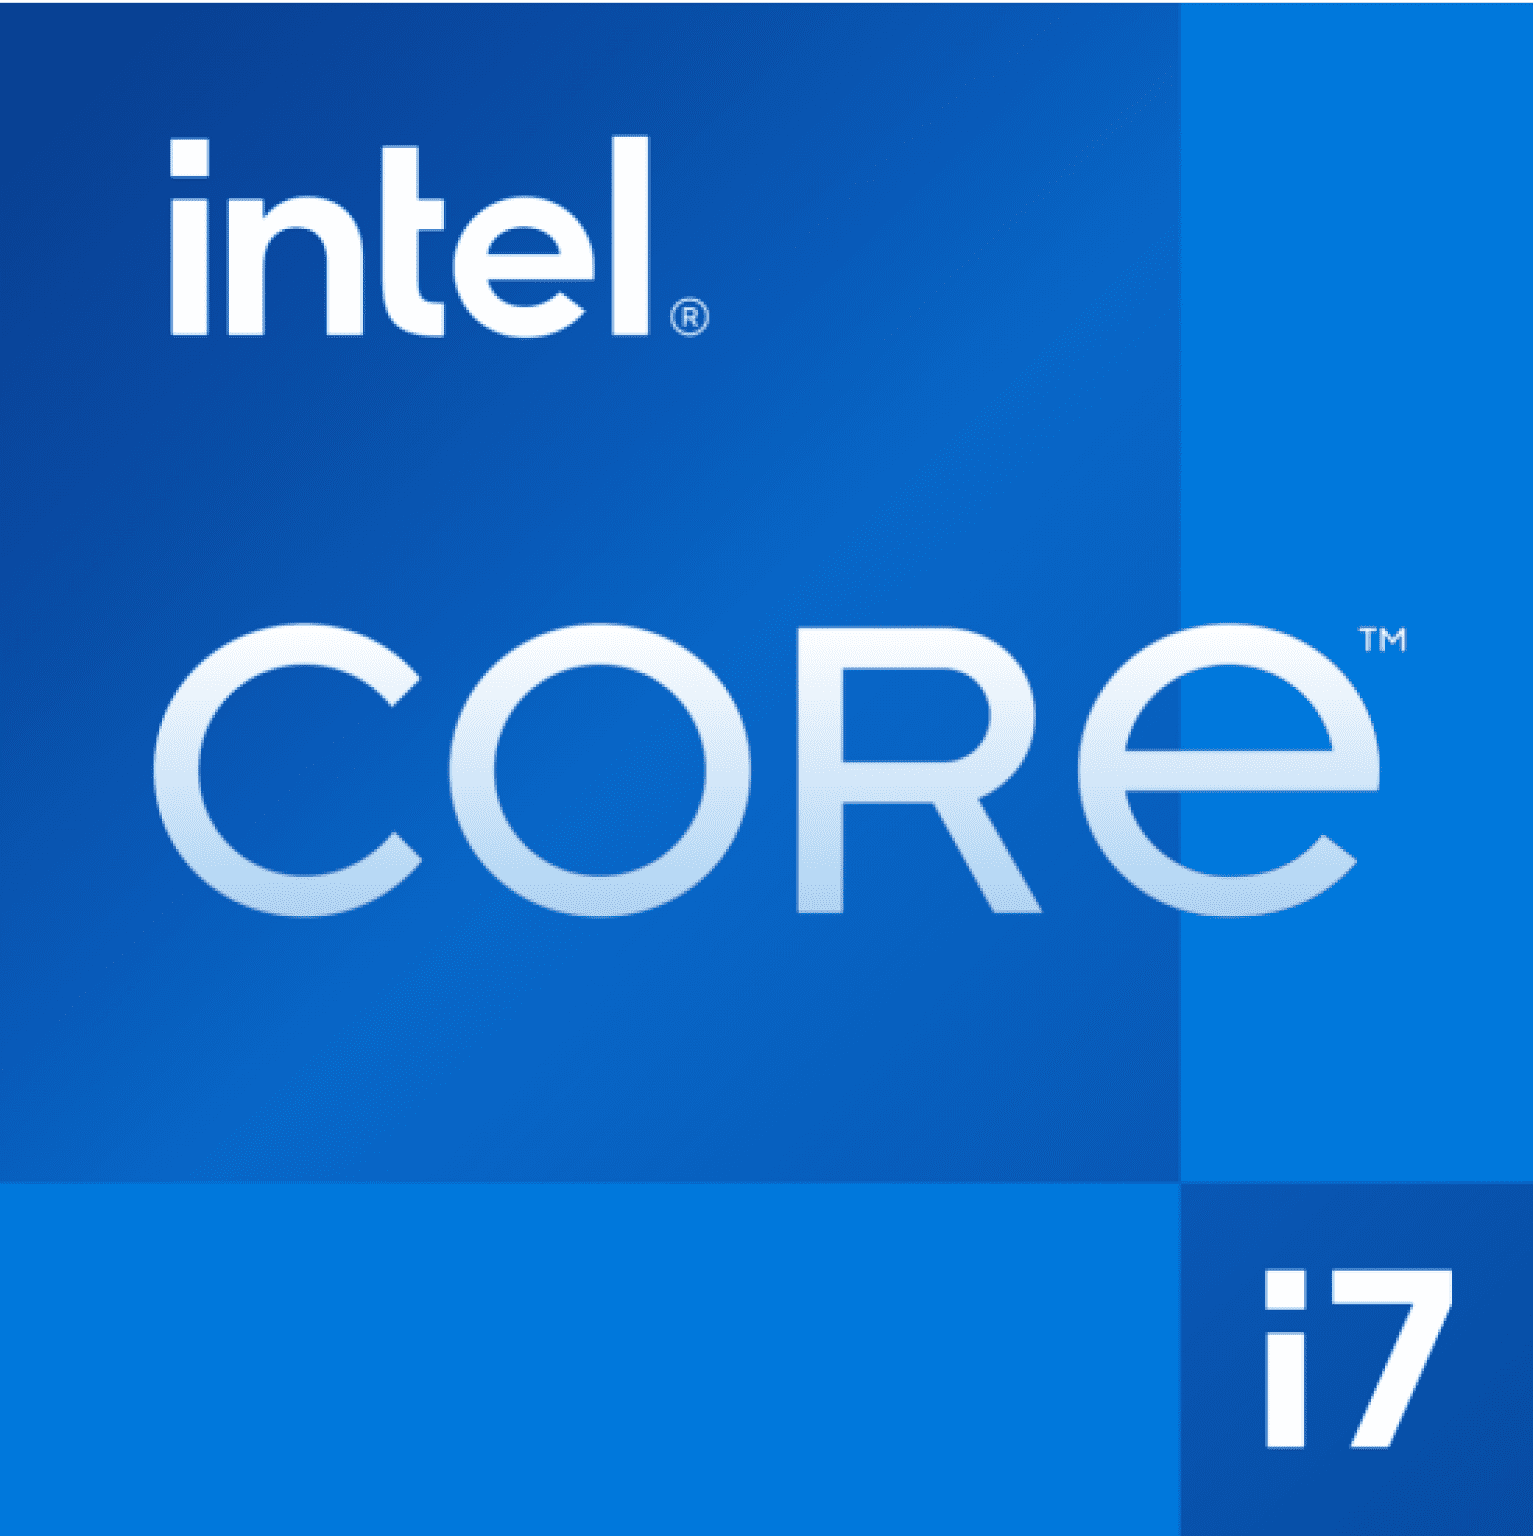 INTEL CORE I7 1195G7 RECORDS SHOCKING BENCHMARK COMPARABLE TO DESKTOP PROCESSORS